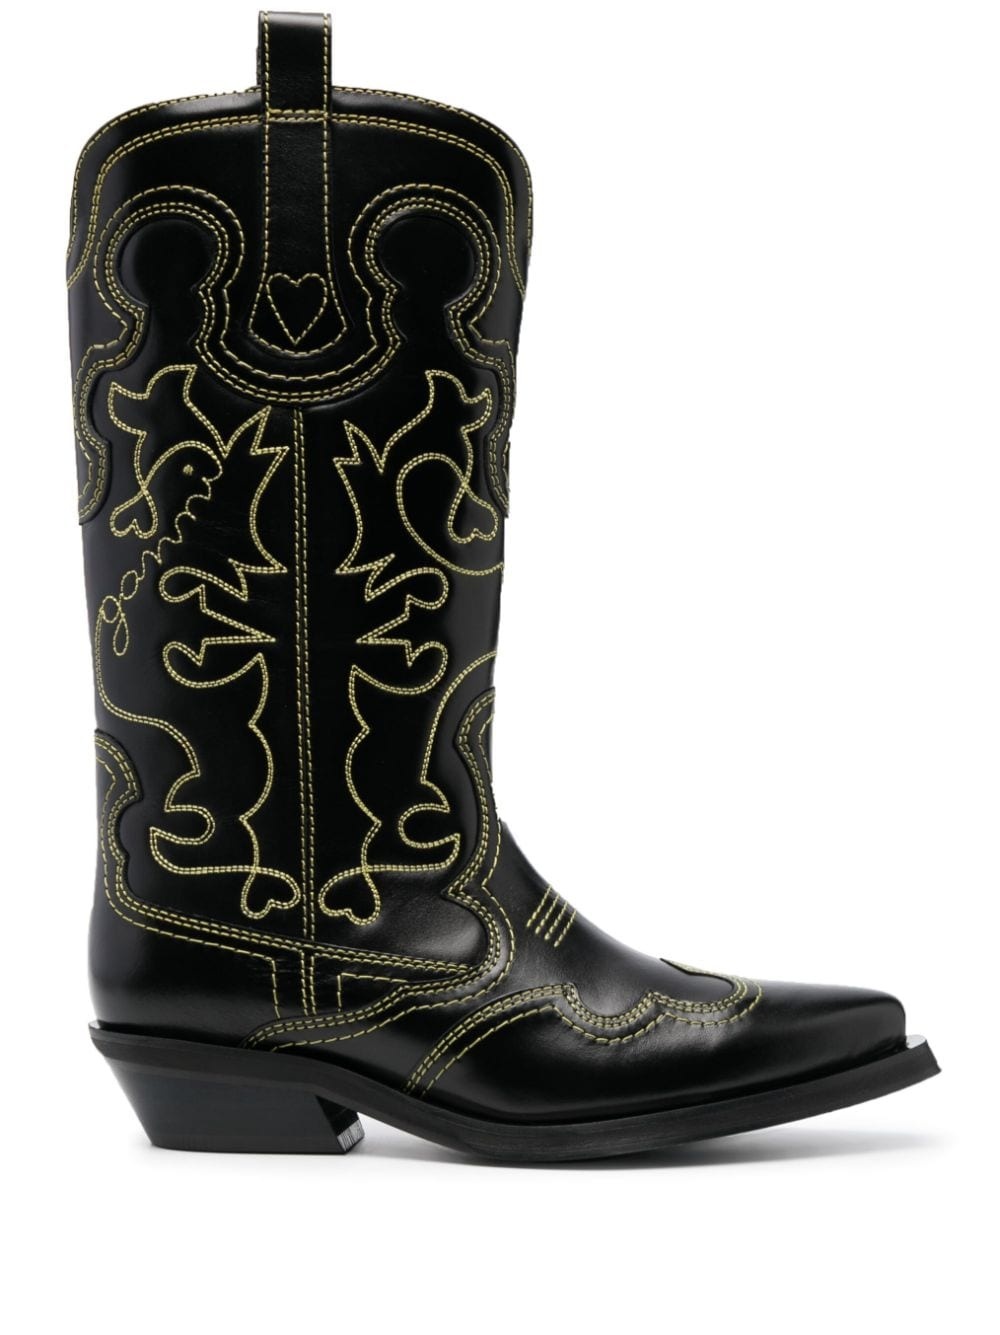 45mm western leather boots - 1